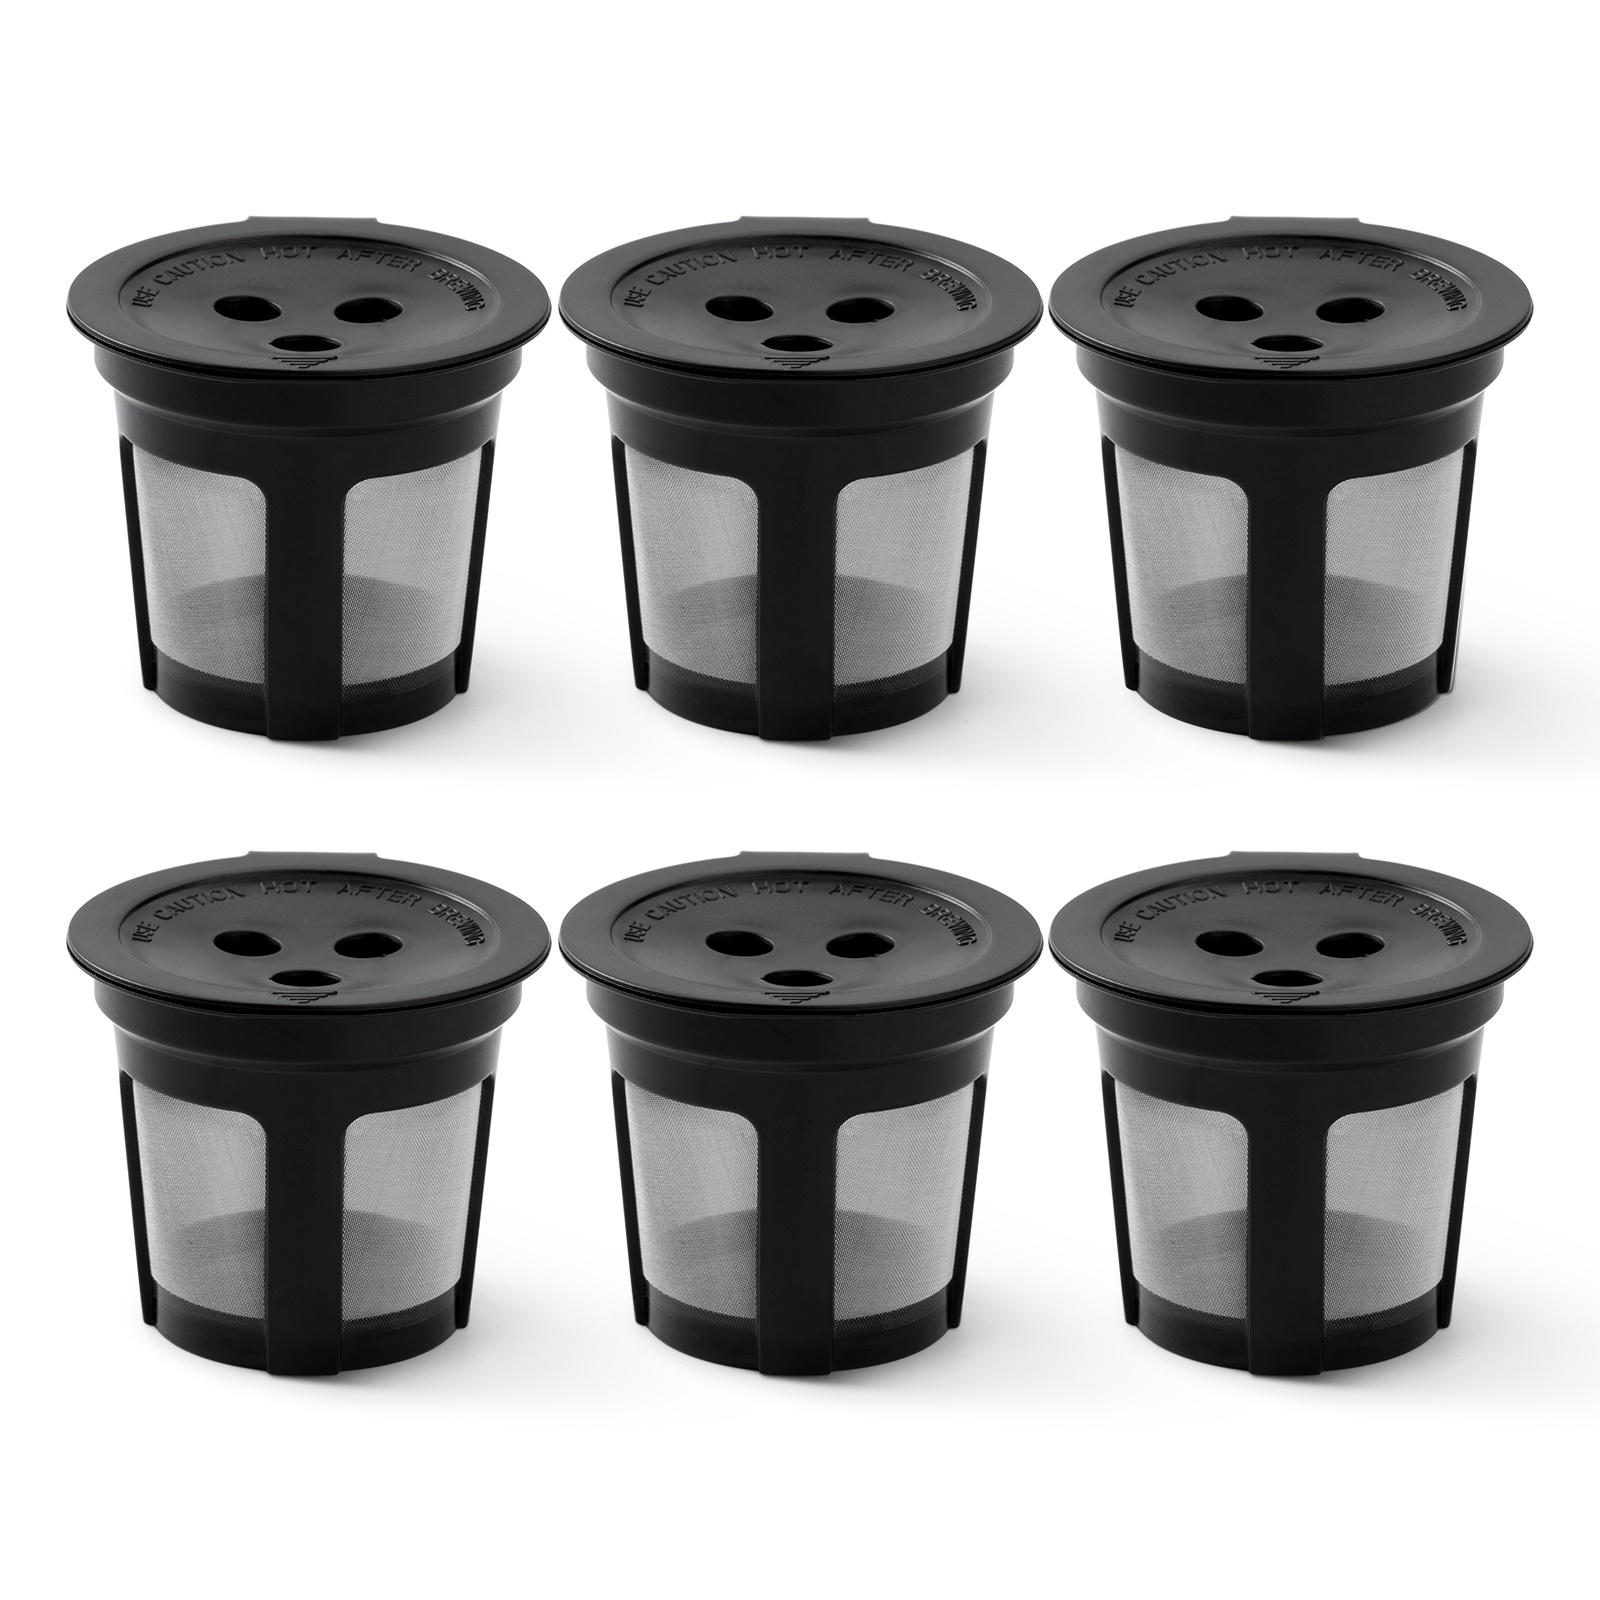 Reusable K Cups for Ninja Dual Brew Coffee Maker, 4 Pack Reusable K Pod,  Permanent K Cups Filters Coffee for Ninja CFP201 CFP301 Dual Brew Pro  Machine 